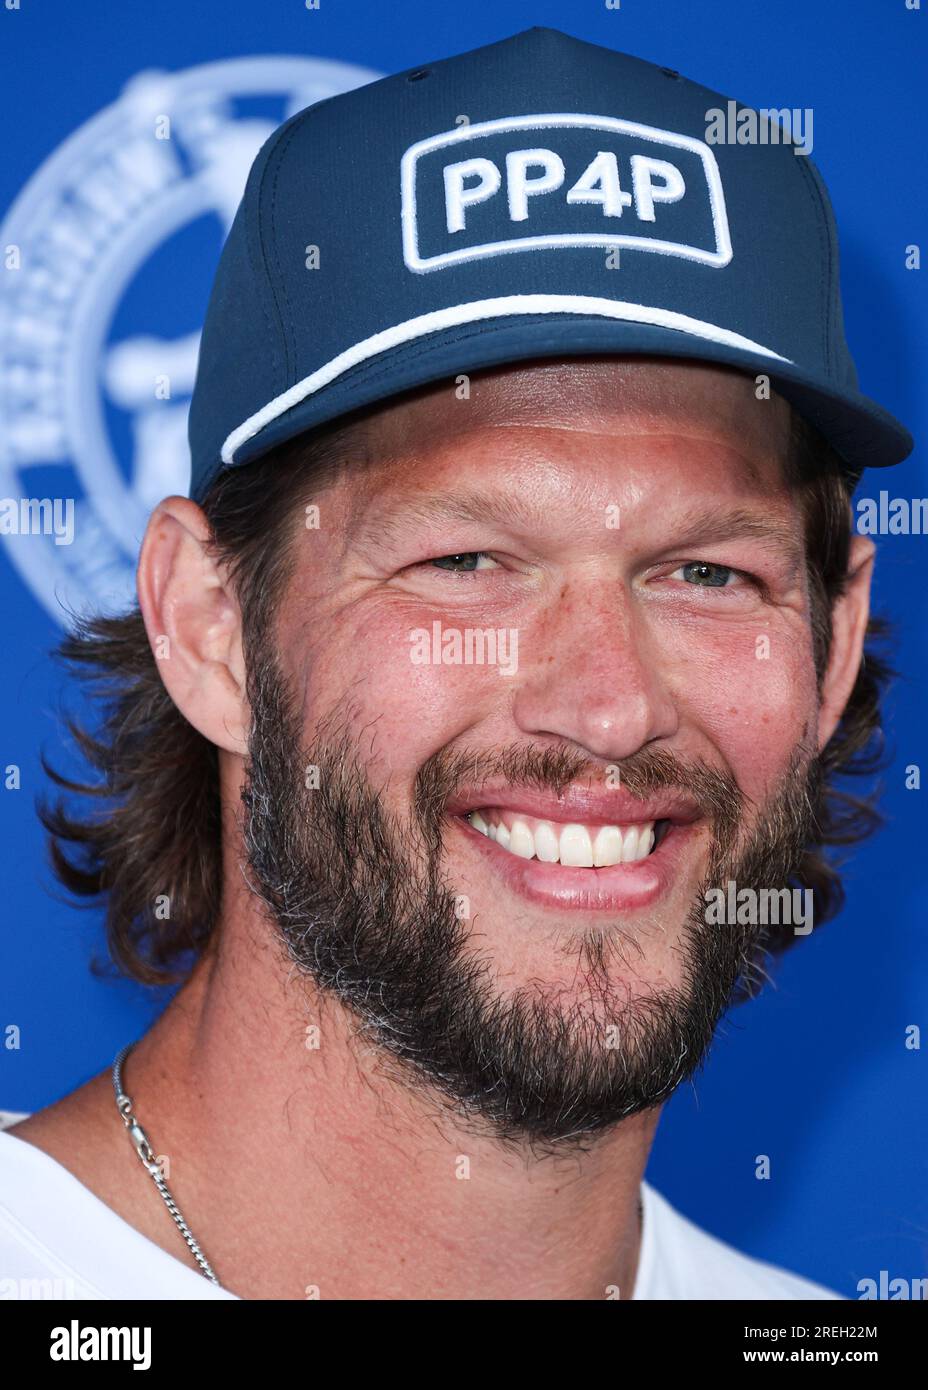 ELYSIAN PARK, LOS ANGELES, CALIFORNIA, USA - JULY 27: American professional baseball pitcher for the Los Angeles Dodgers of Major League Baseball Clayton Kershaw arrives at Kershaw's Challenge 10th Annual Ping Pong 4 Purpose 2023 Charity Event Celebrity Tournament held at Dodger Stadium on July 27, 2023 in Elysian Park, Los Angeles, California, United States. (Photo by Xavier Collin/Image Press Agency) Stock Photo